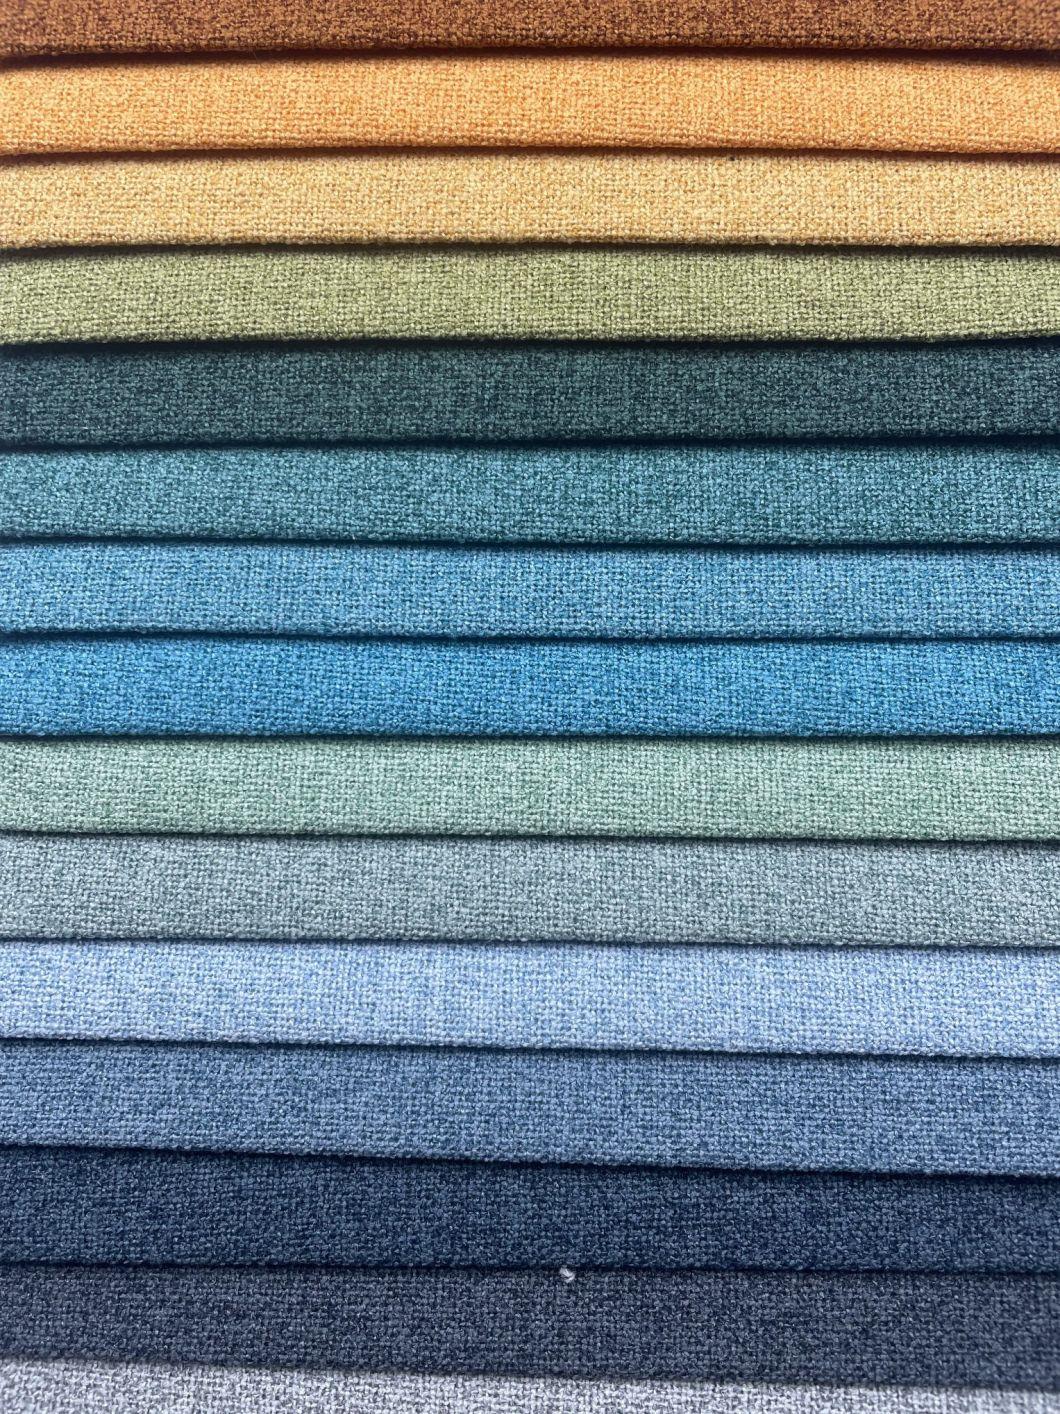 2022 New 100% Polyester Material Fabric for Home Textile and Sofa Fabric